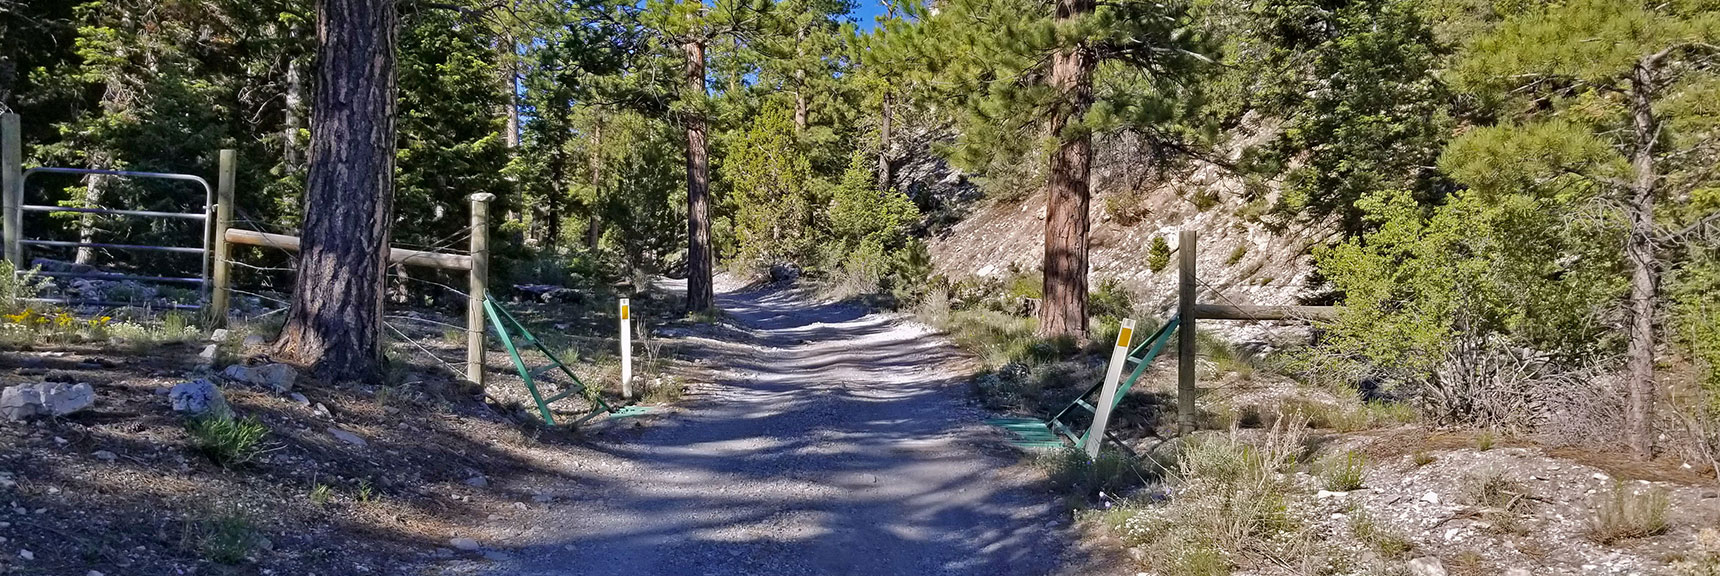 4 Miles in: Macks Canyon Rd Narrows Just Before Upper and Lower Group Camp Areas | Macks Peak | Mt Charleston Wilderness | Spring Mountains, Nevada